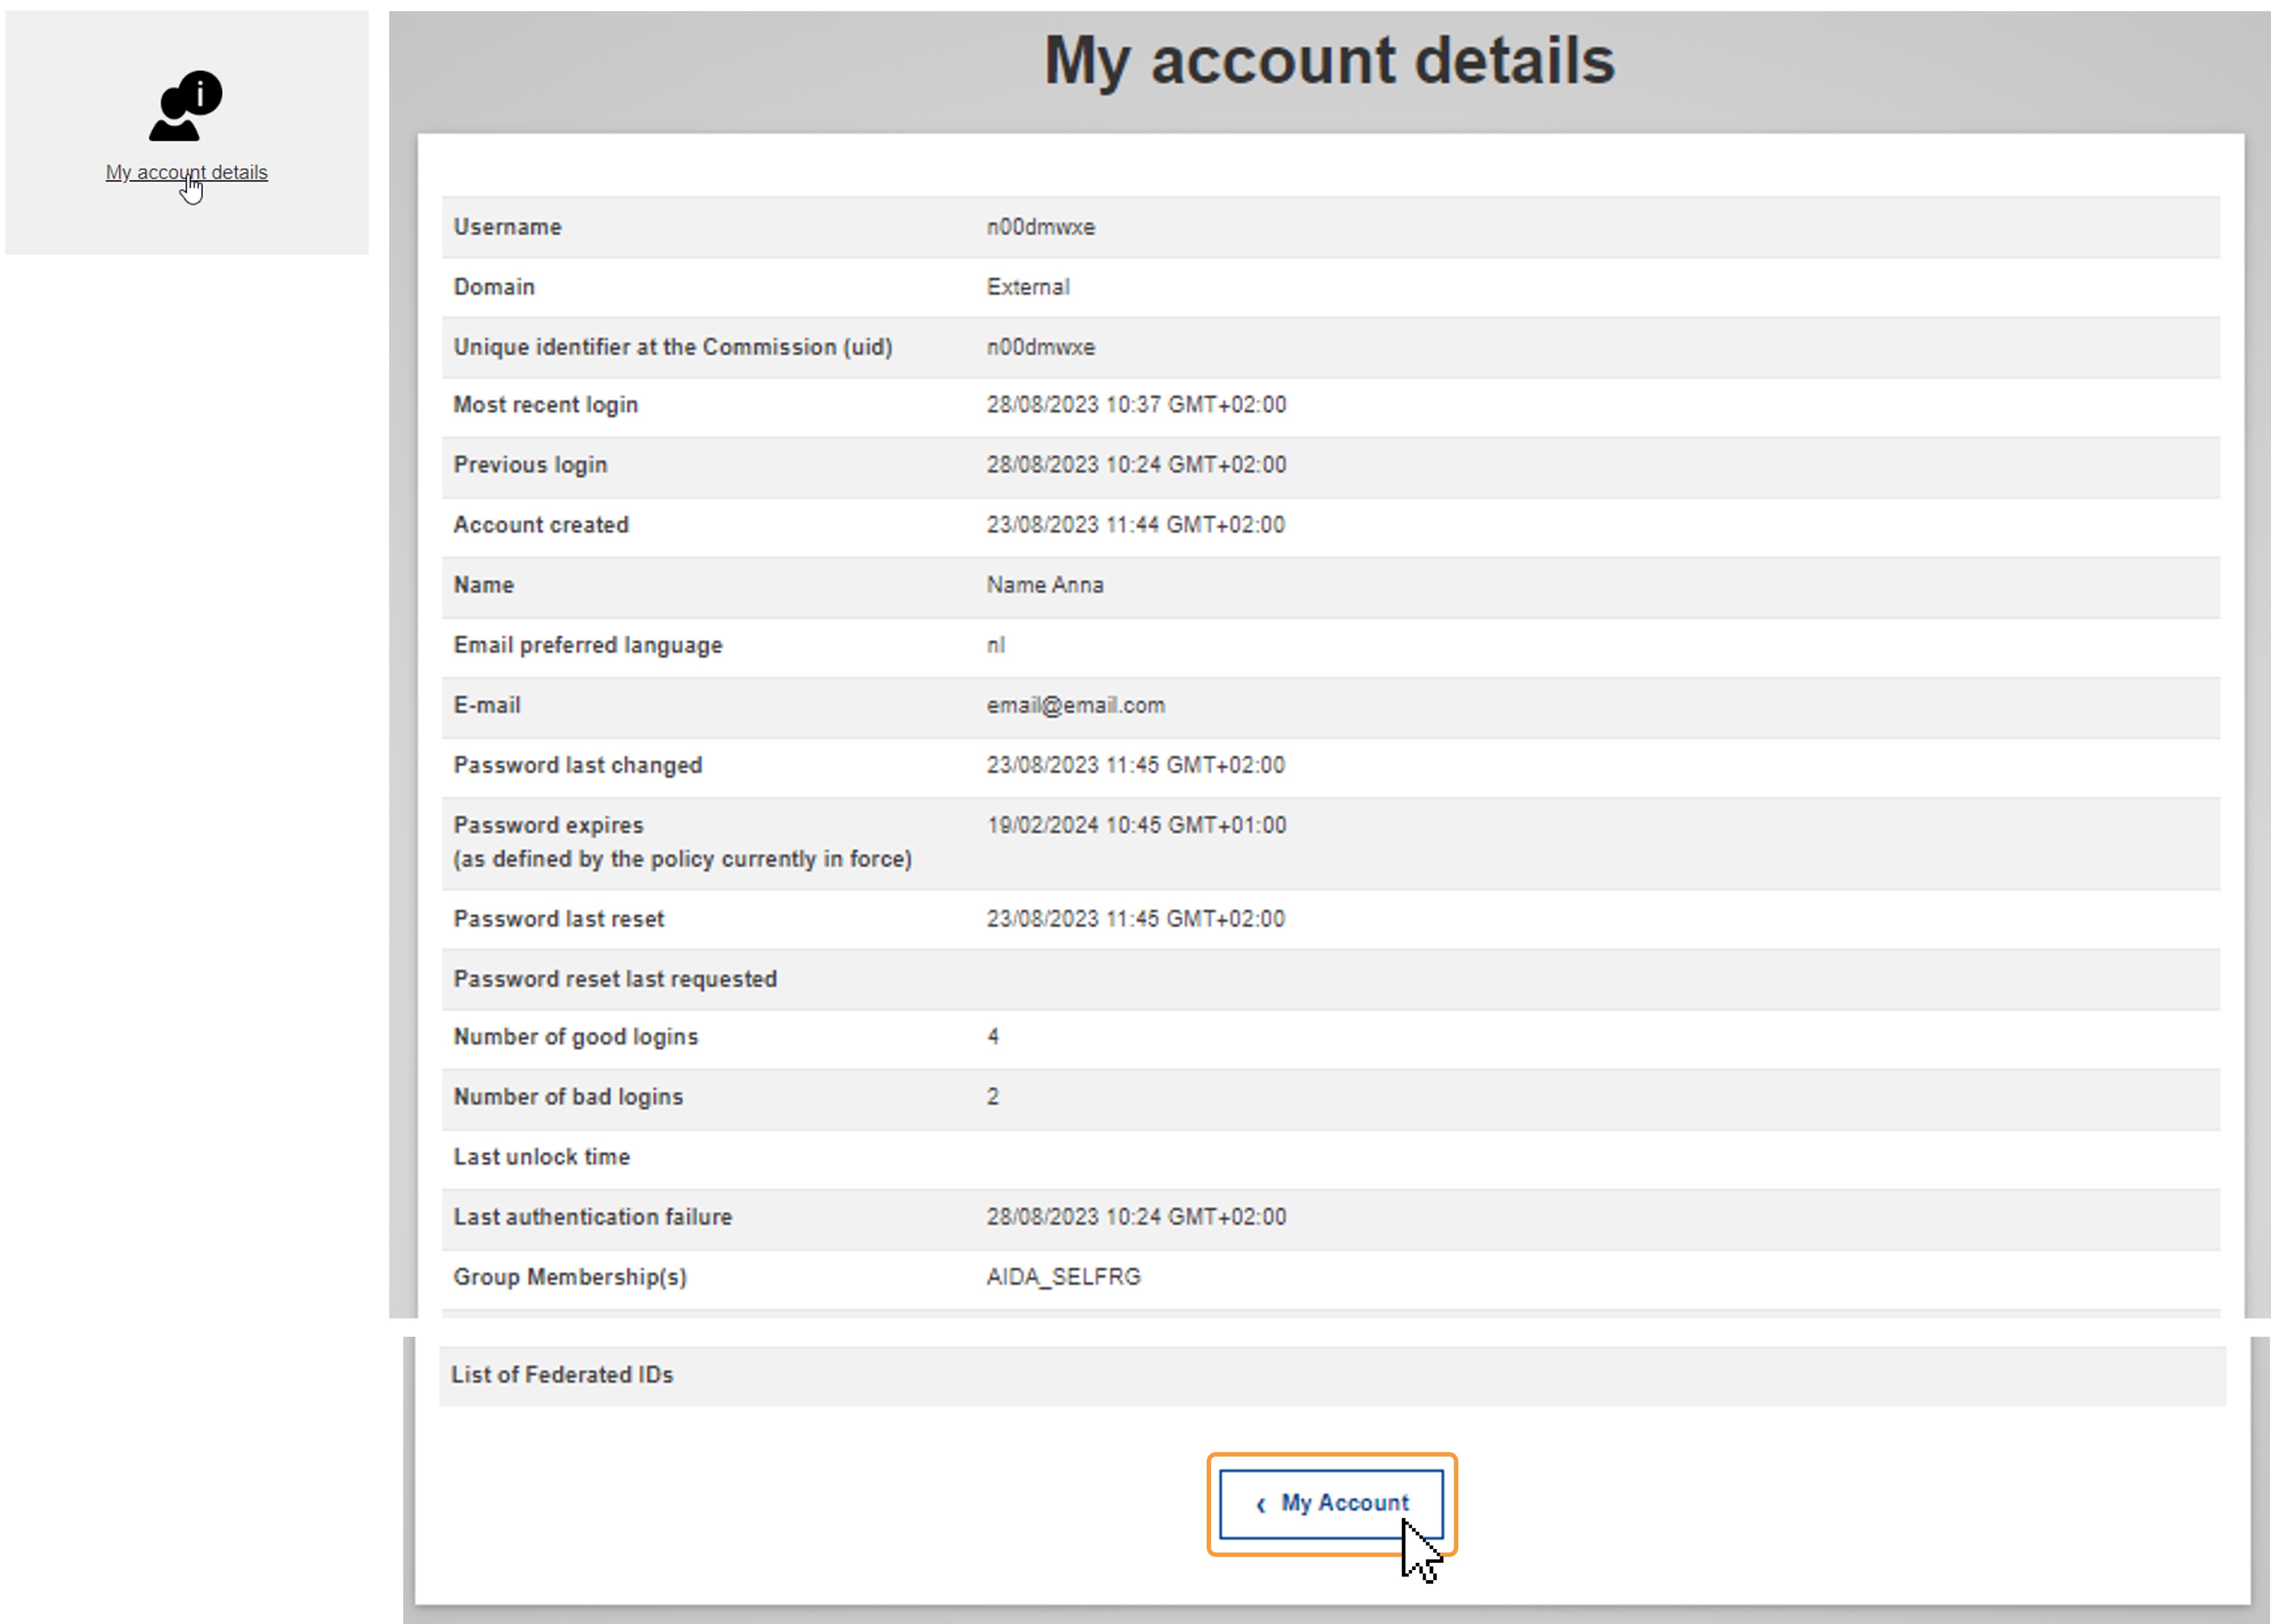 My account details